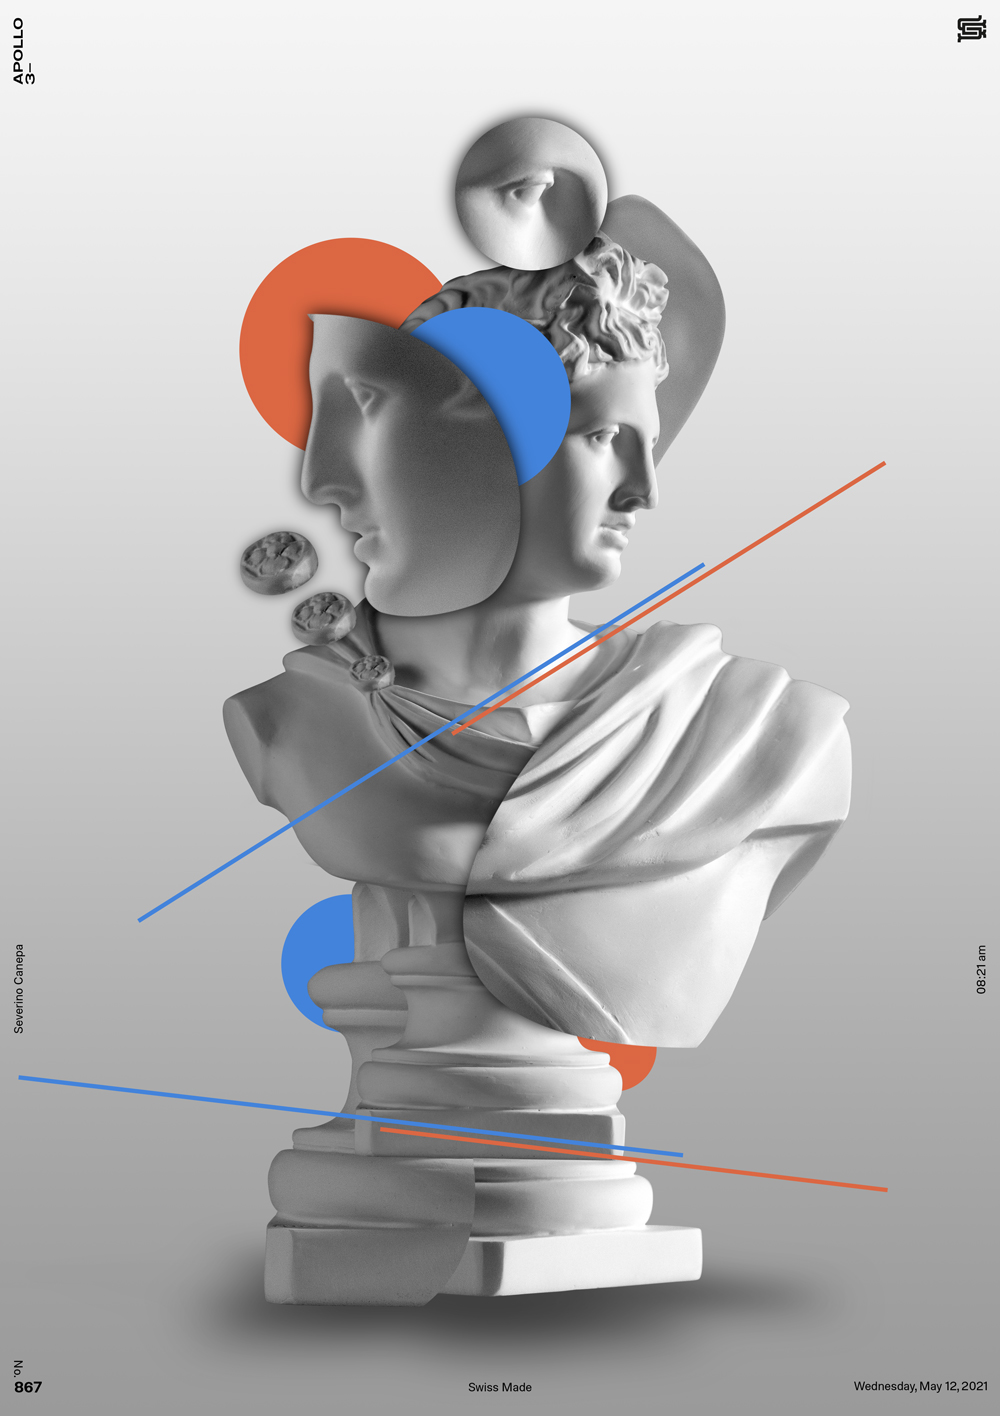 Visual artwork make with the statue of Apollo and geometric shapes